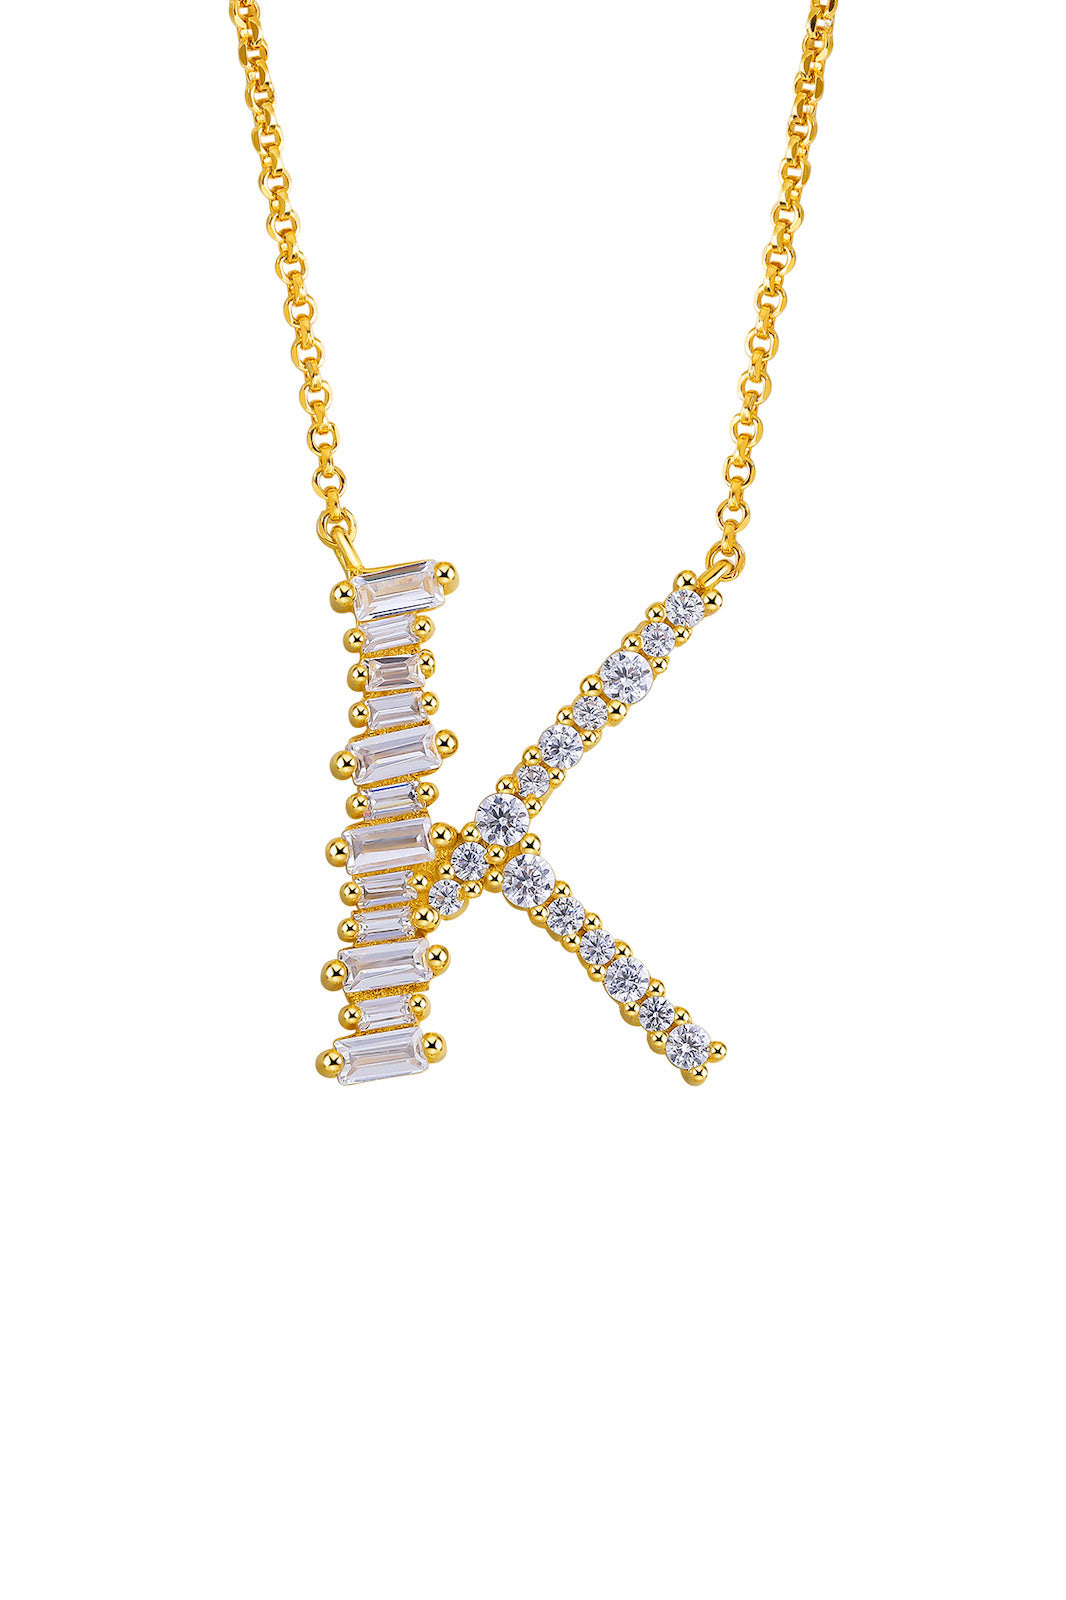 Gold Cz Letter K Initial Necklace 925 Sterling Silver Pendant Womens  9mm(0.35